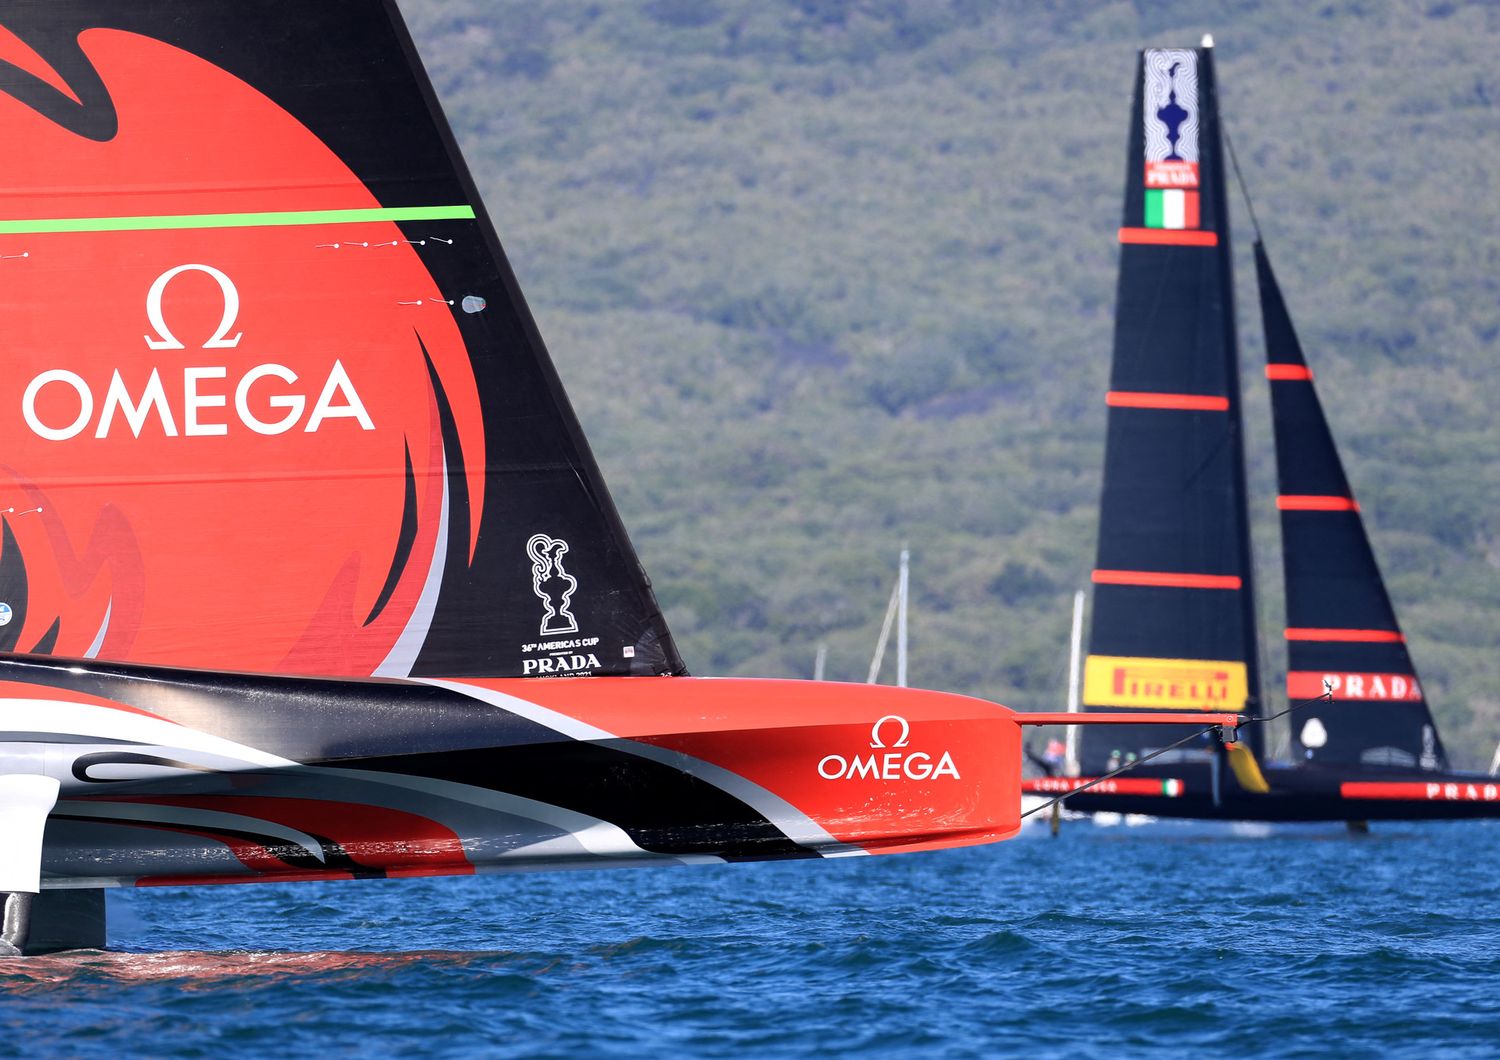 America's Cup 2021